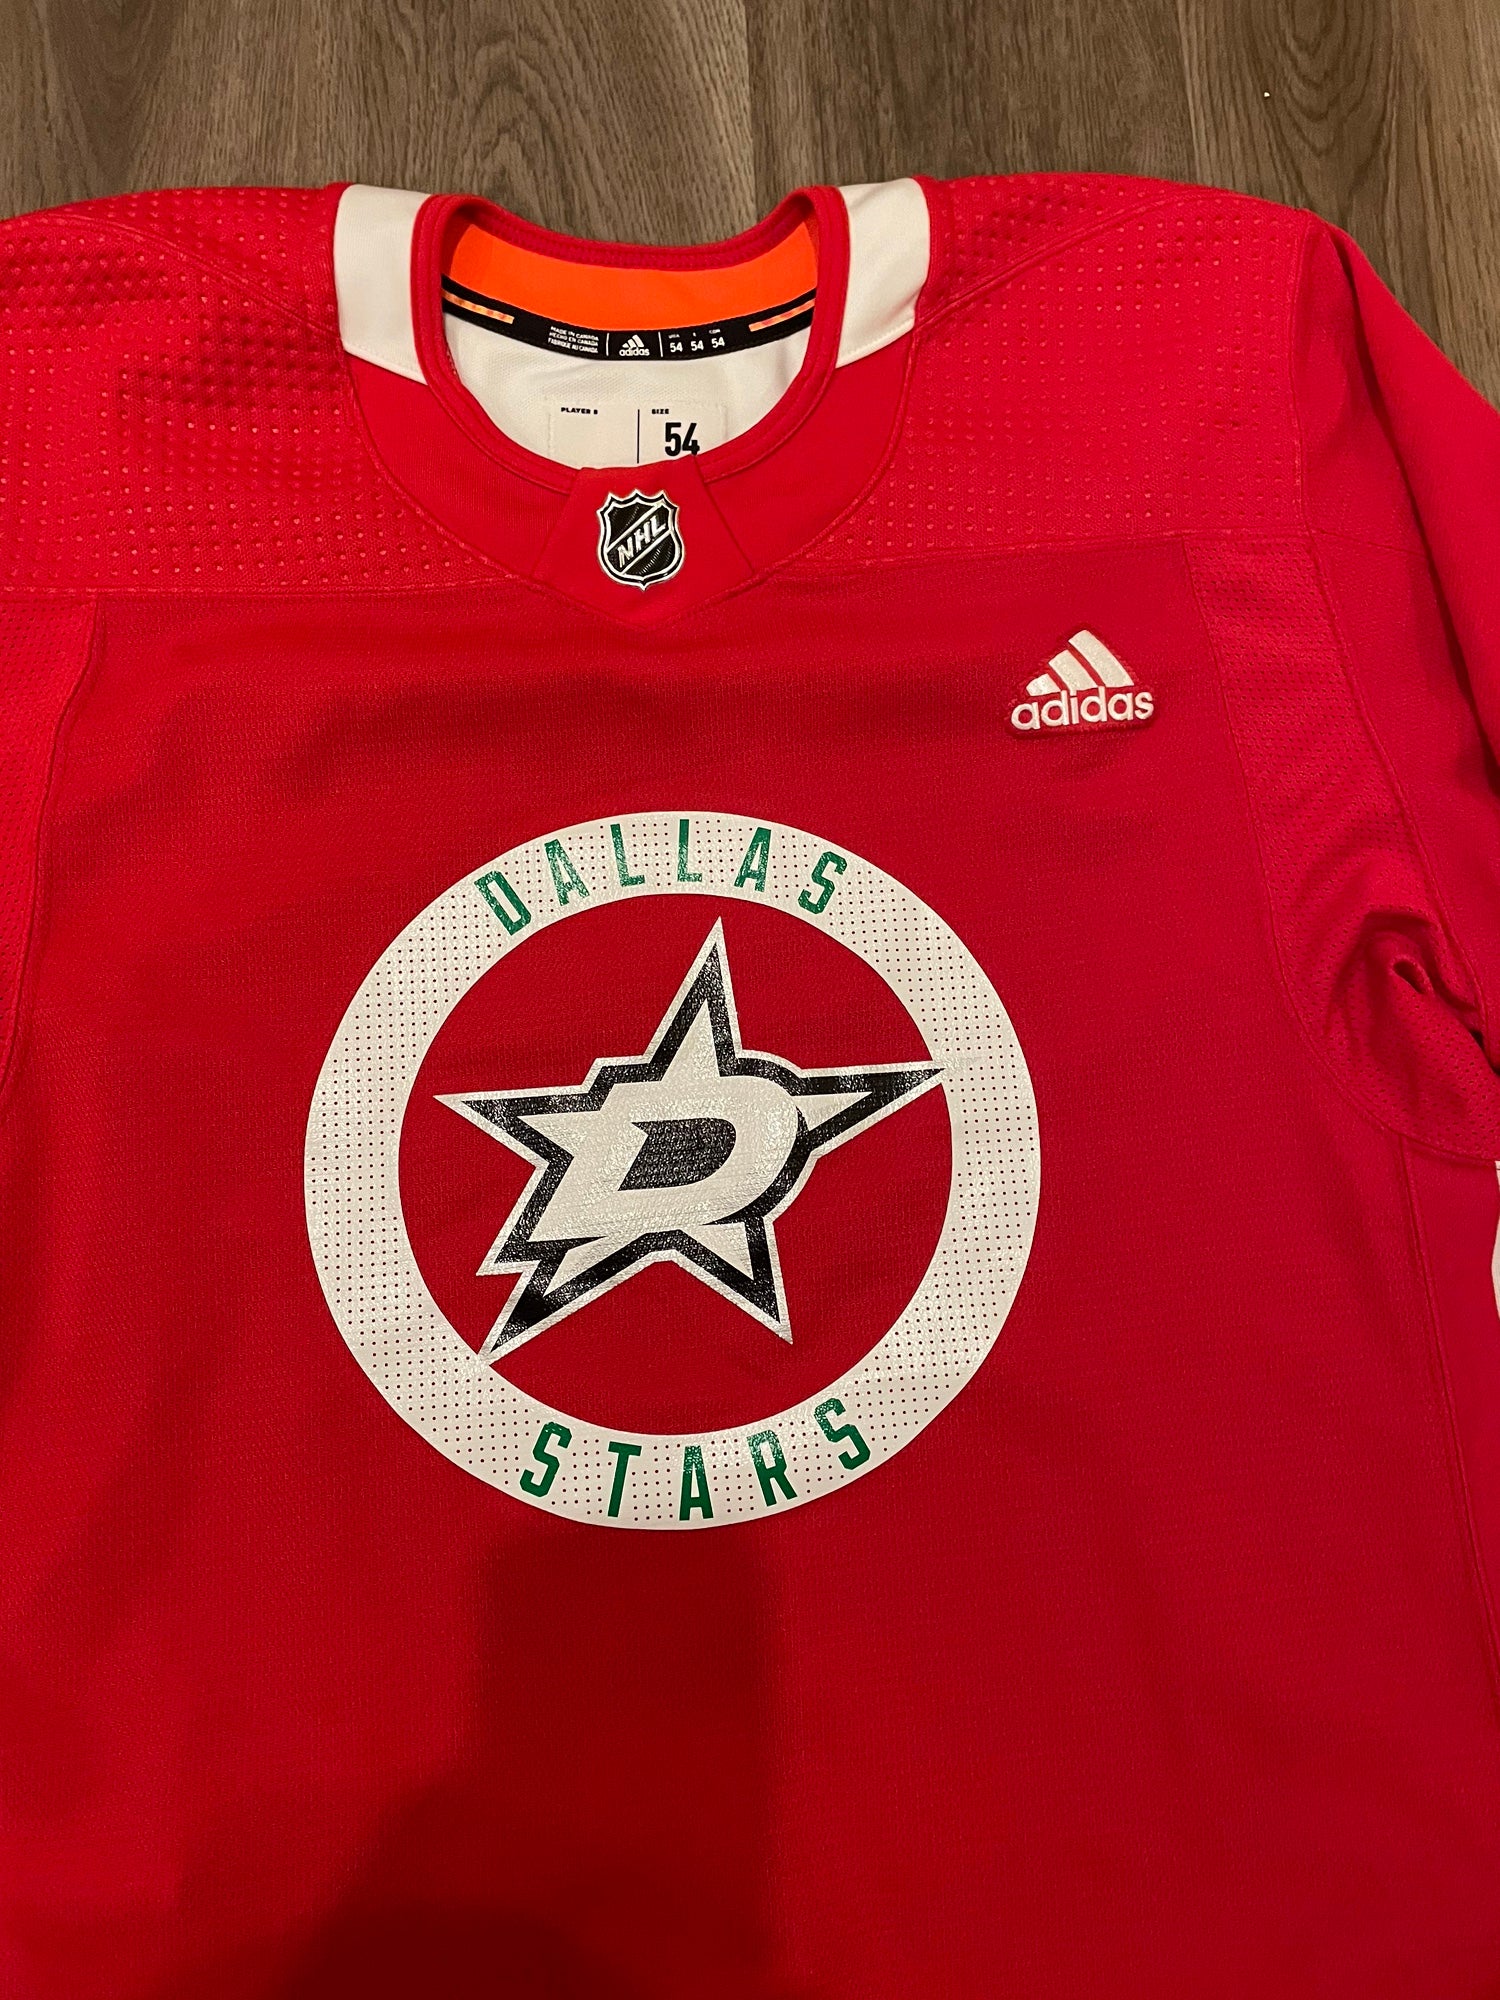 PRO PLAYERS x DALLAS STARS PRACTICE JERSEY – Play-Stars Collection